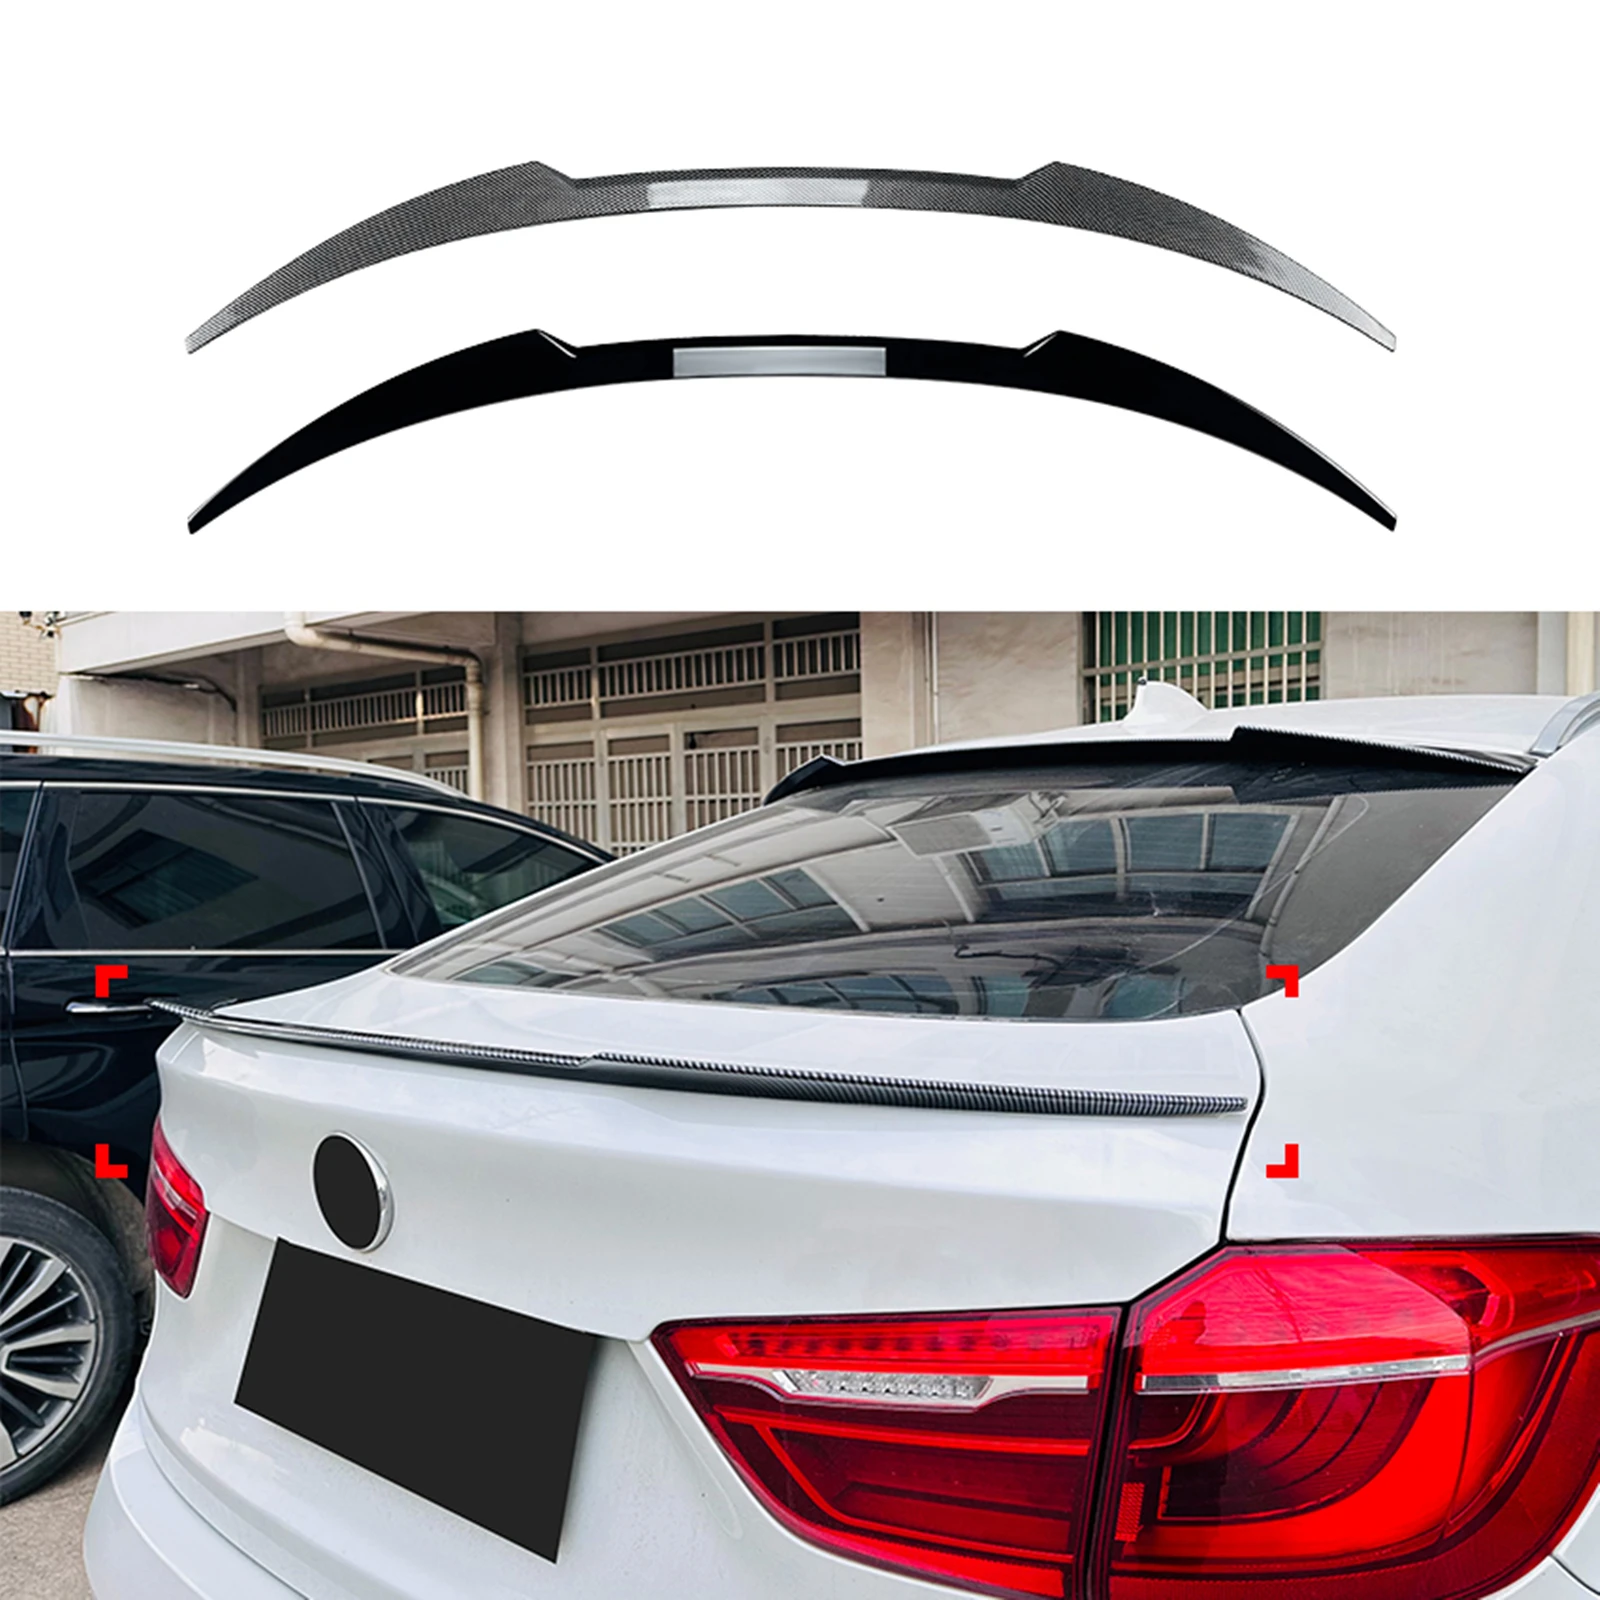 

For BMW X6 F16 X6M 2014-2020 Rear Trunk Lid Spoiler Wing ABS Carbon Fiber Look/Gloss Black Tail Tailgate Splitter Extension Lip